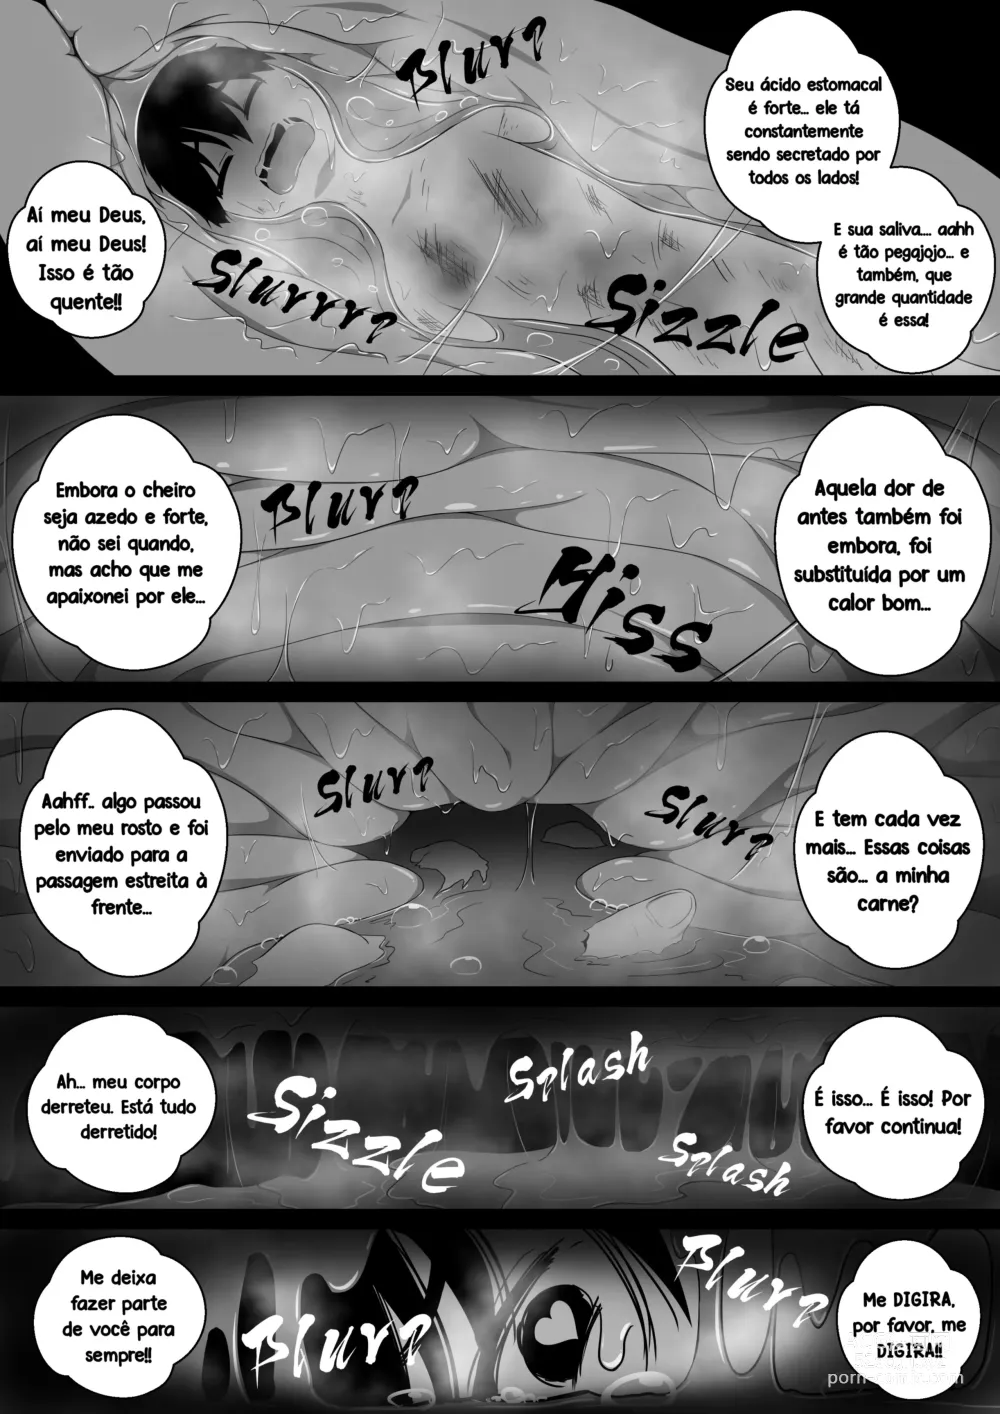 Page 23 of doujinshi Monstergirl Song - Snake Chapter [CG17] PT-BR